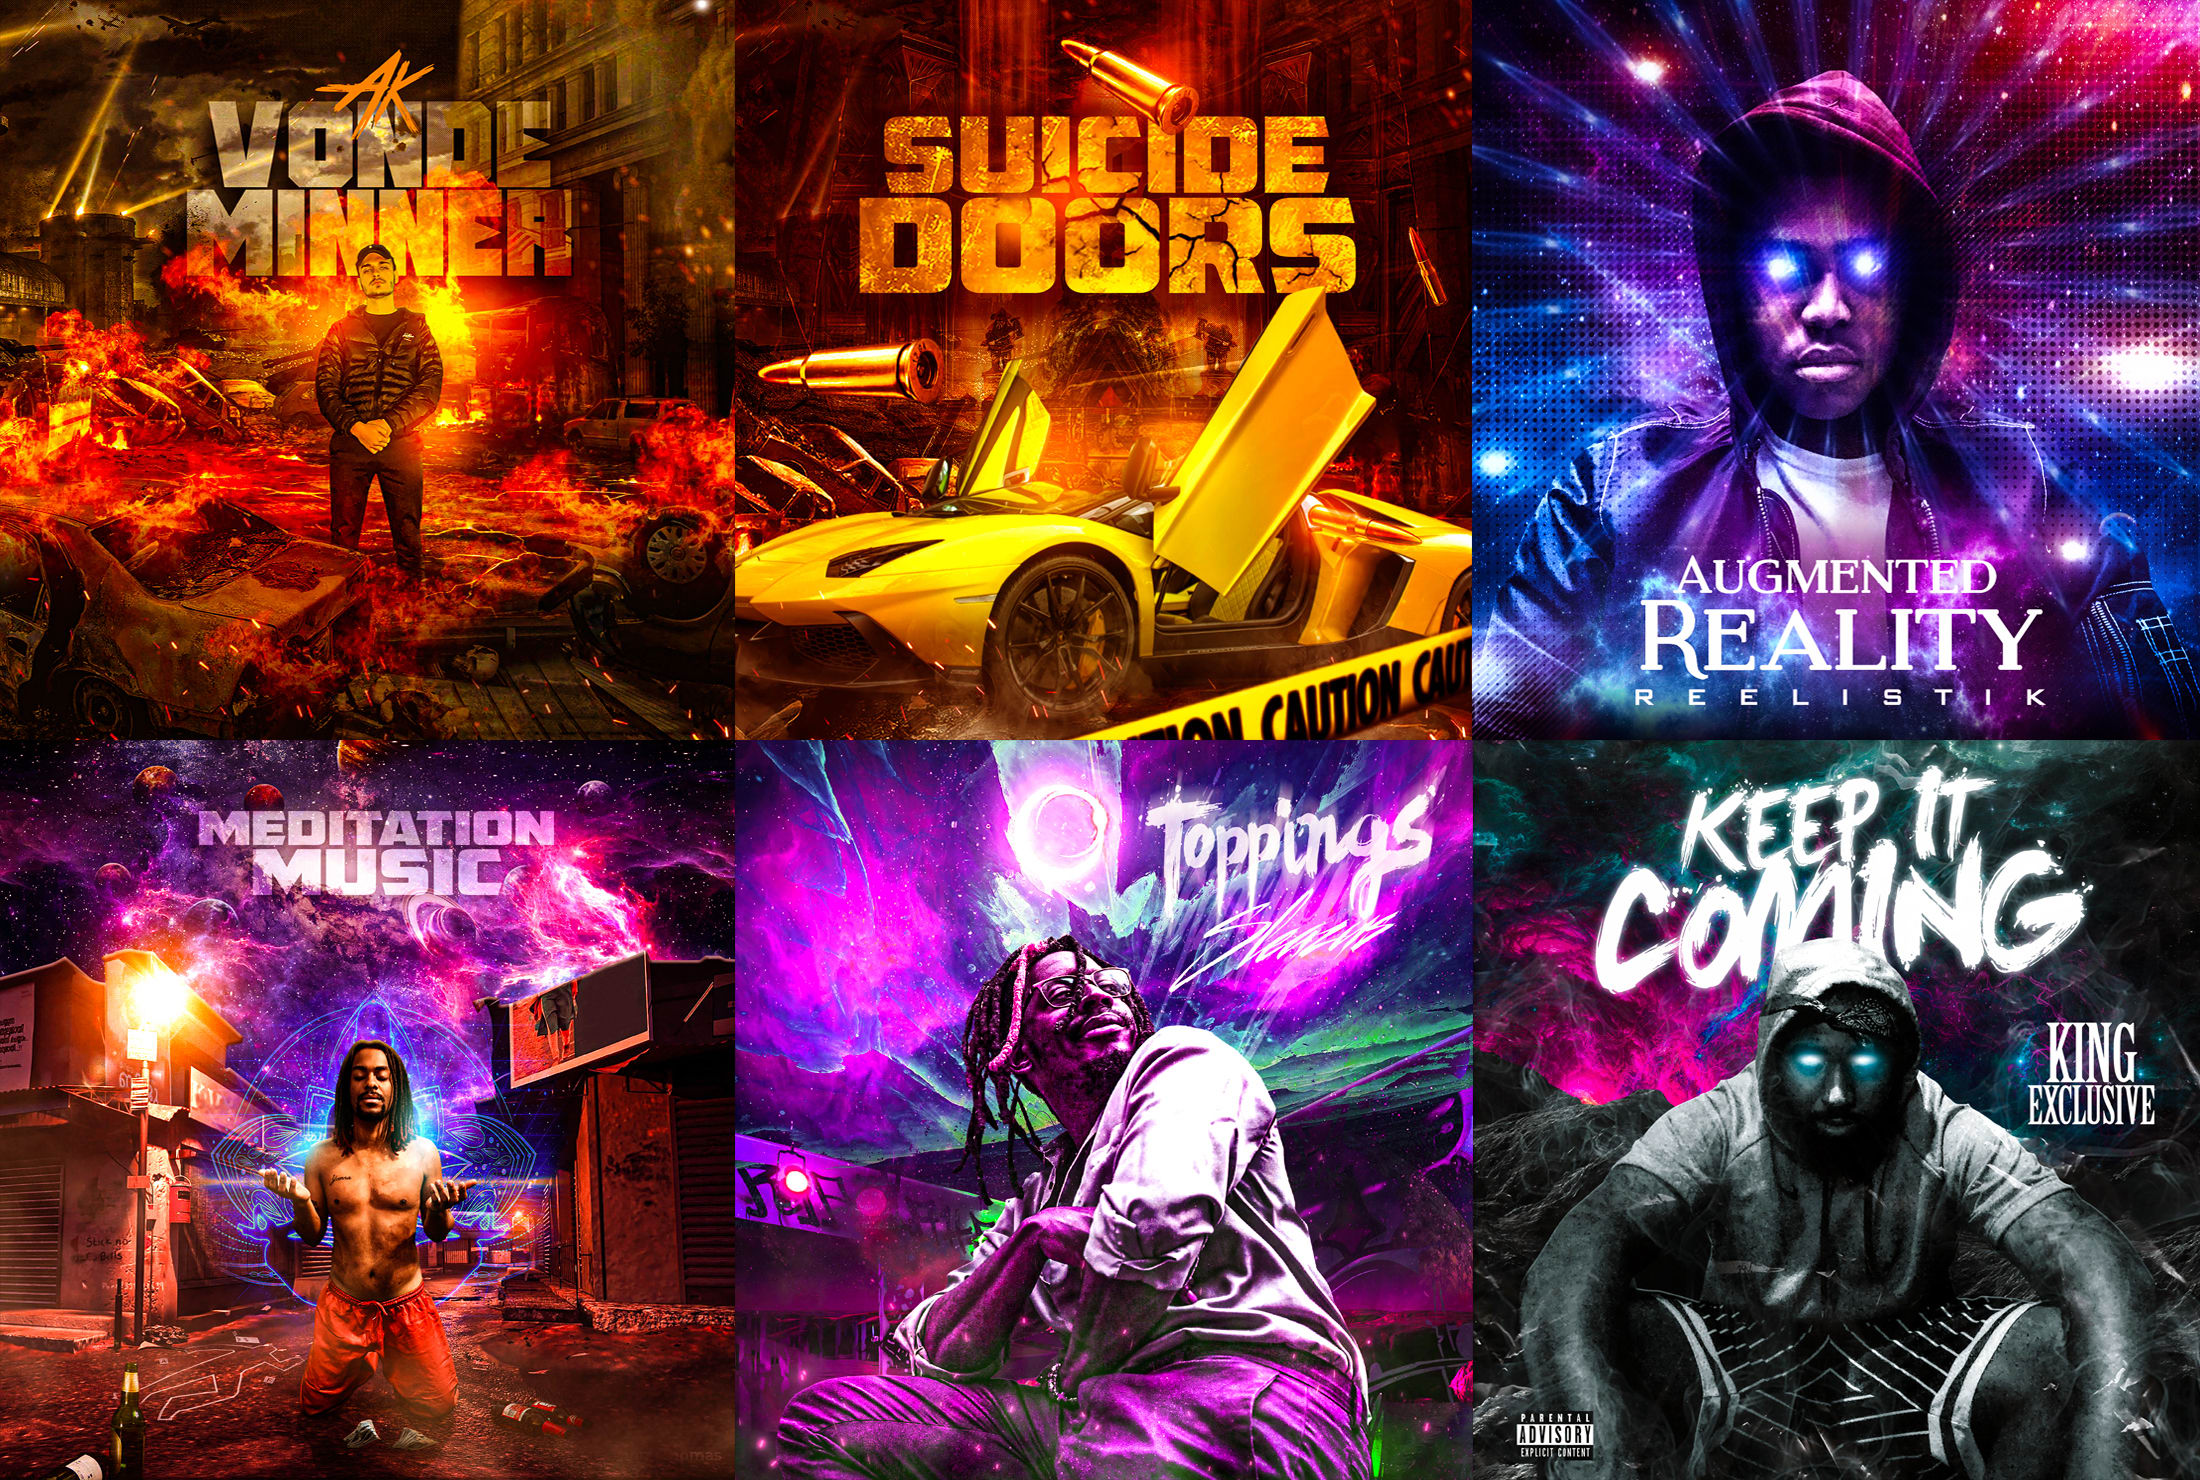 Design mixtape cover and album cover designs by Toinggraphicss